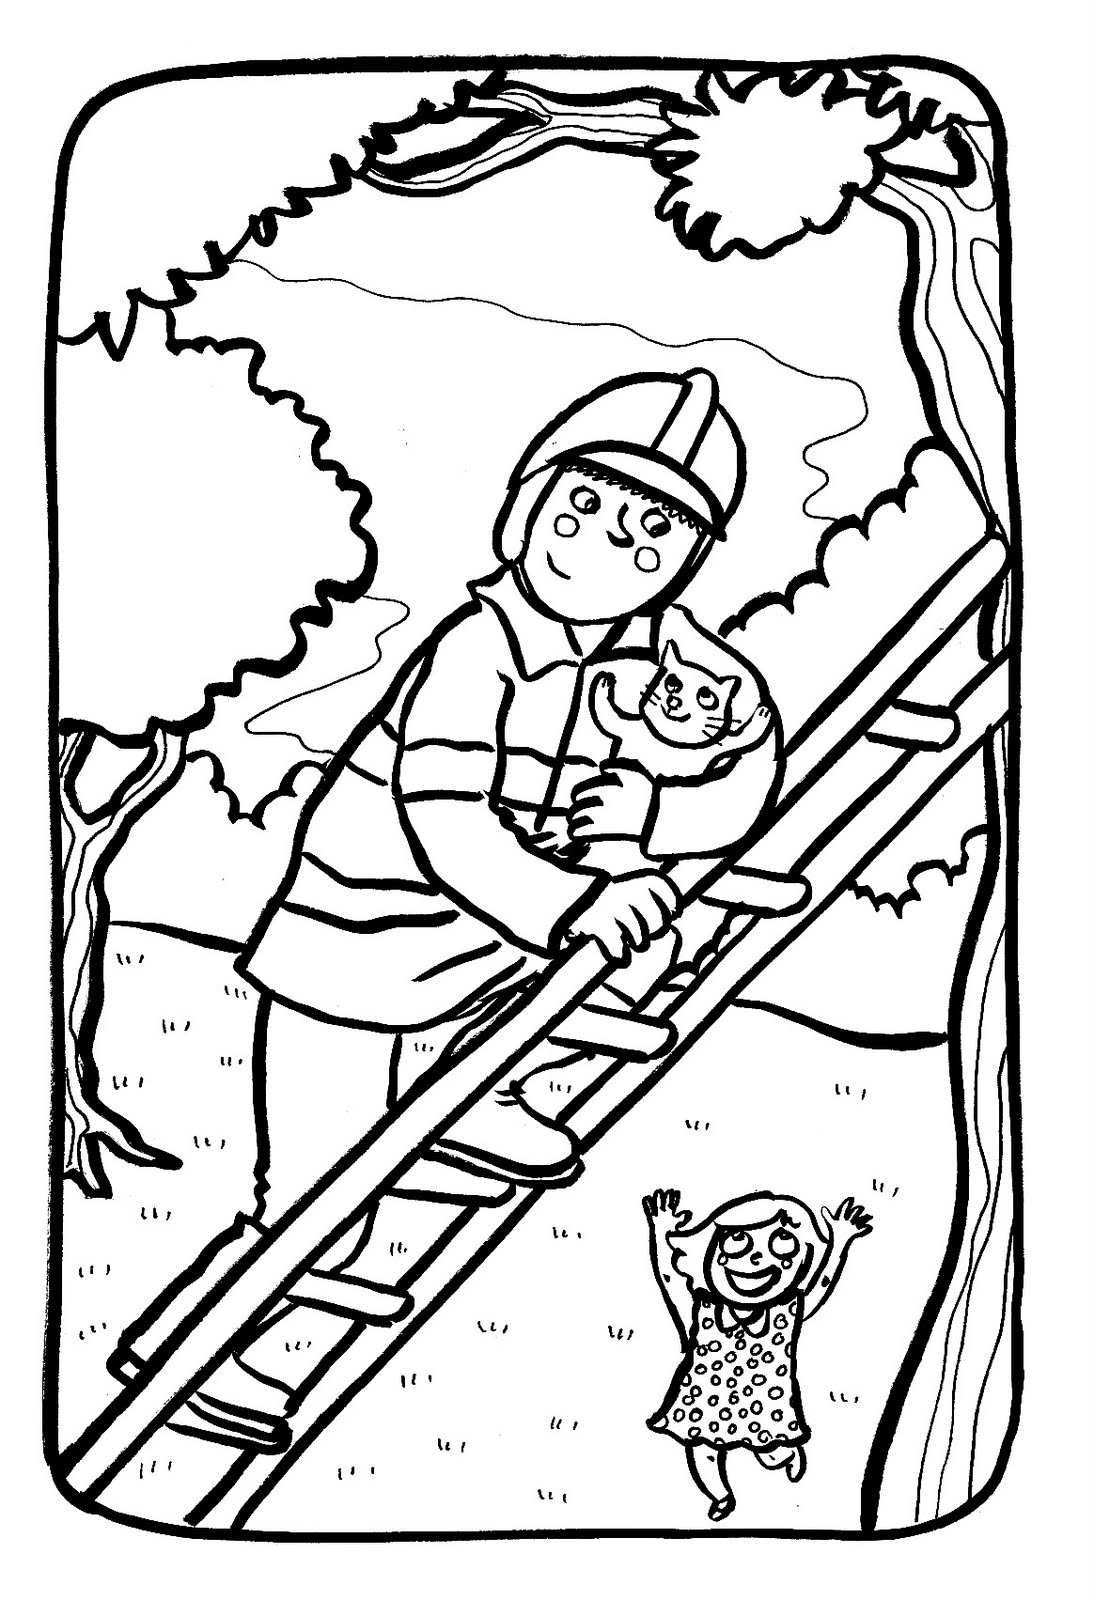 Fire department to color for children - Fire Department Kids Coloring Pages